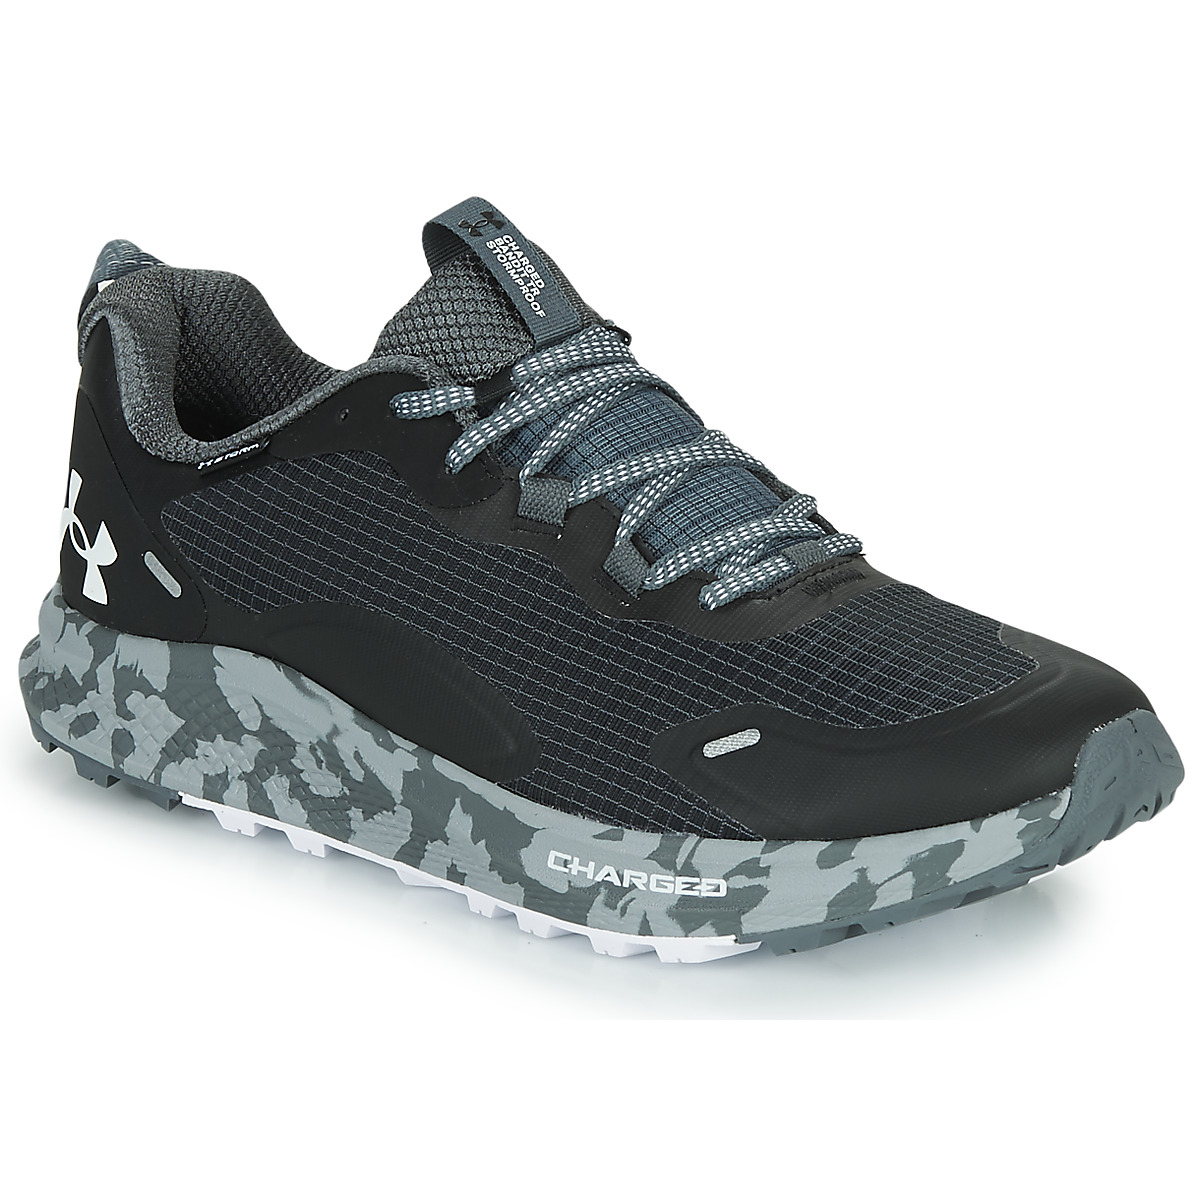 Under Armour Ua Charged Bandit Tr 2 Sp Black